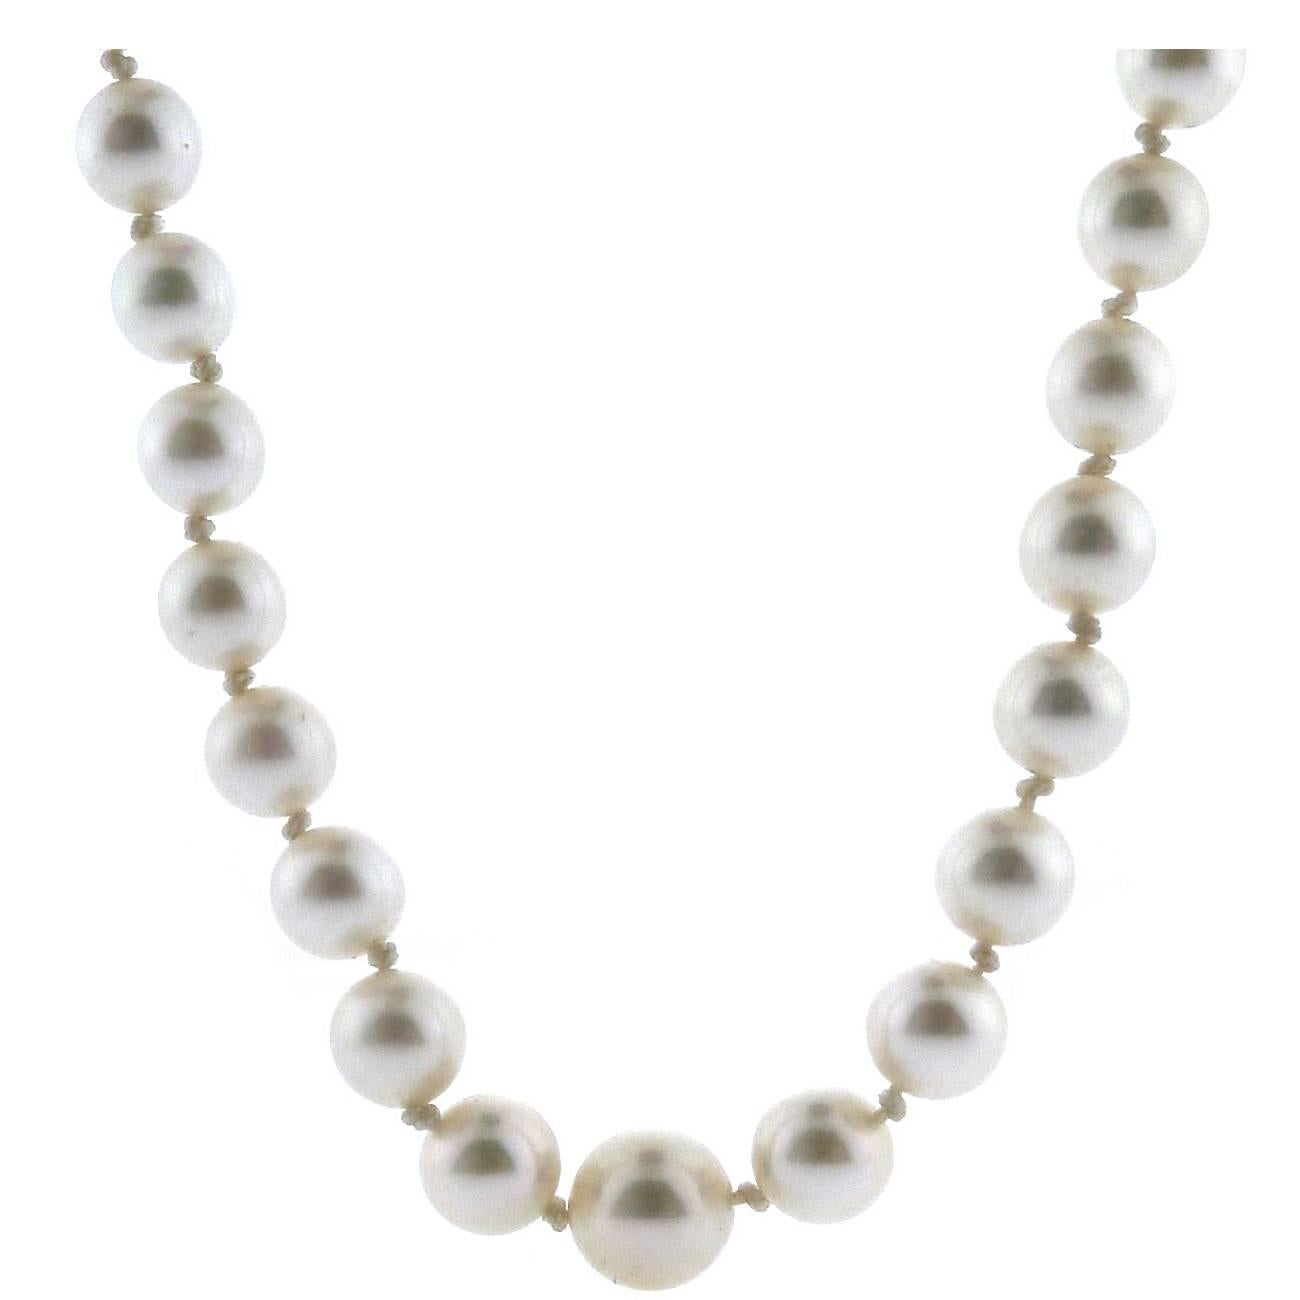 Strand of Graduated Mikimoto Cultured Pearls with Silver Clasp